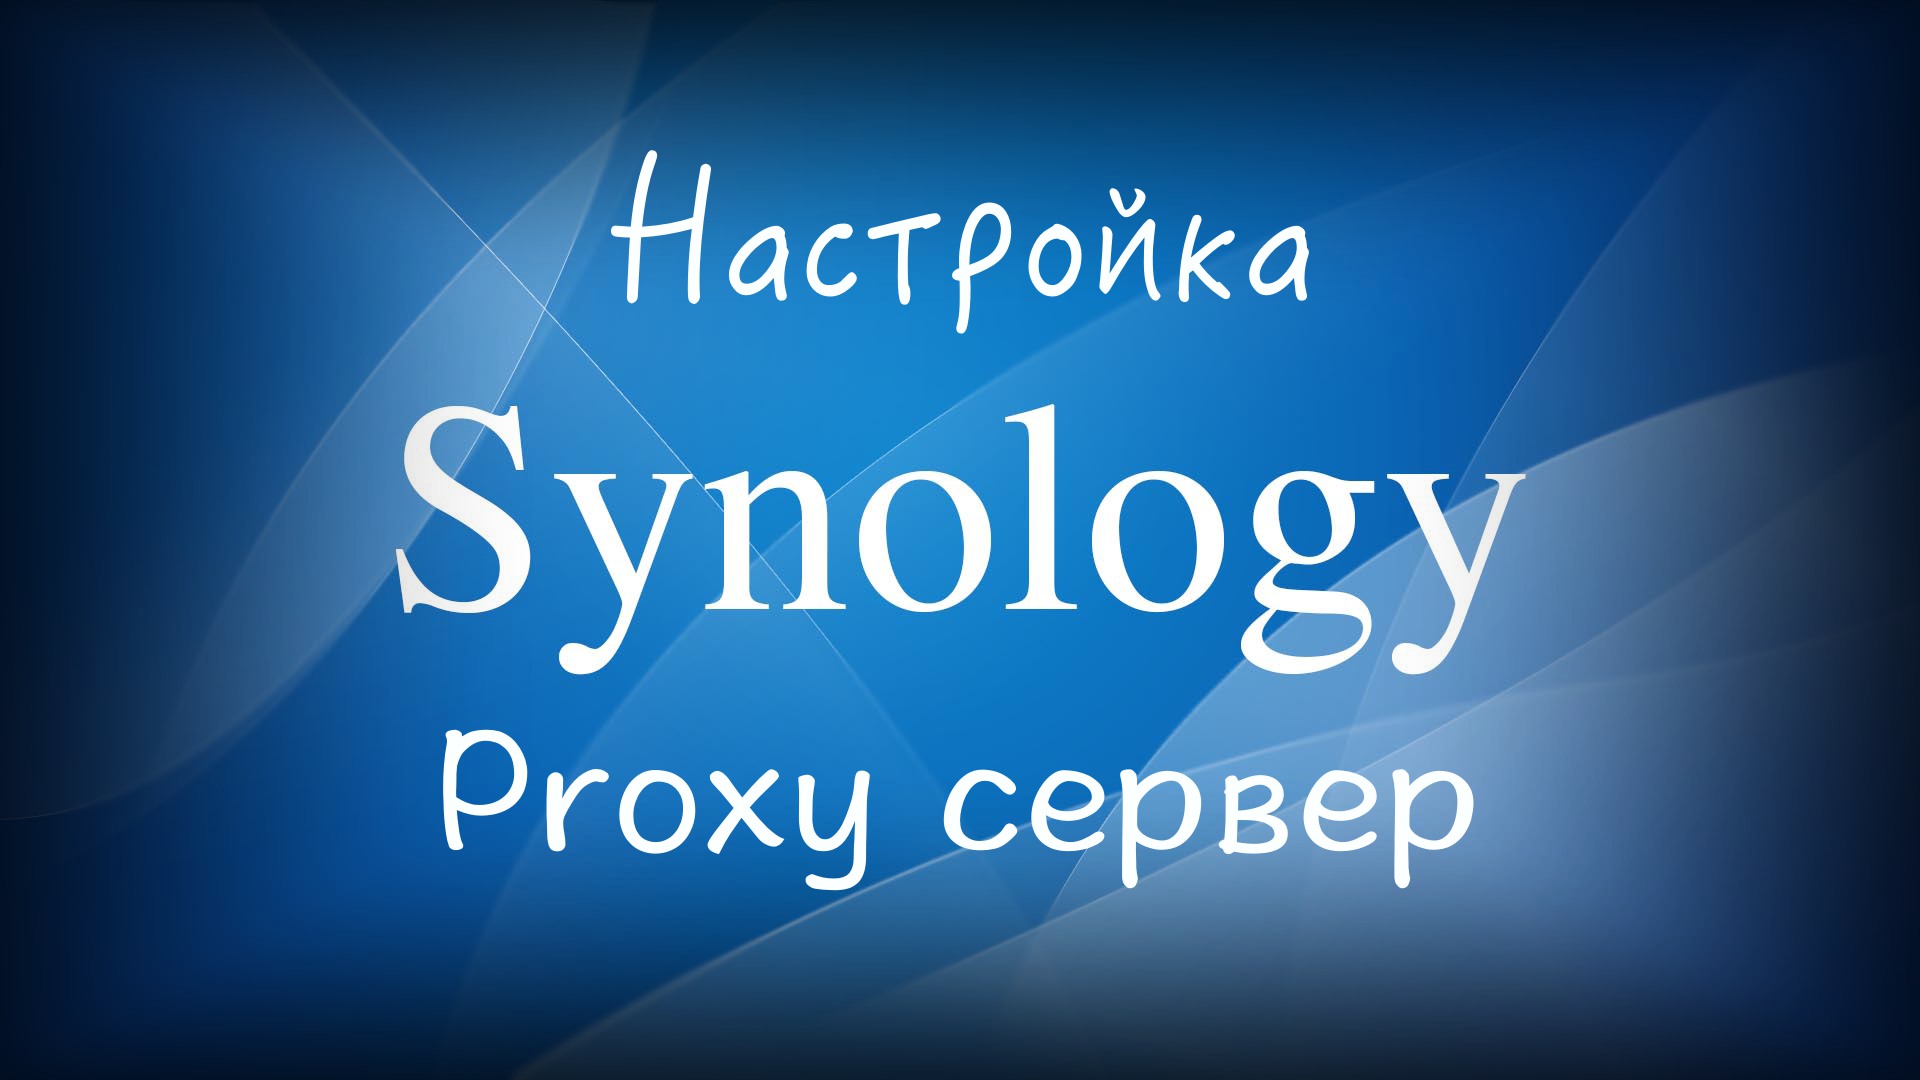 Read more about the article Synology Proxy сервер